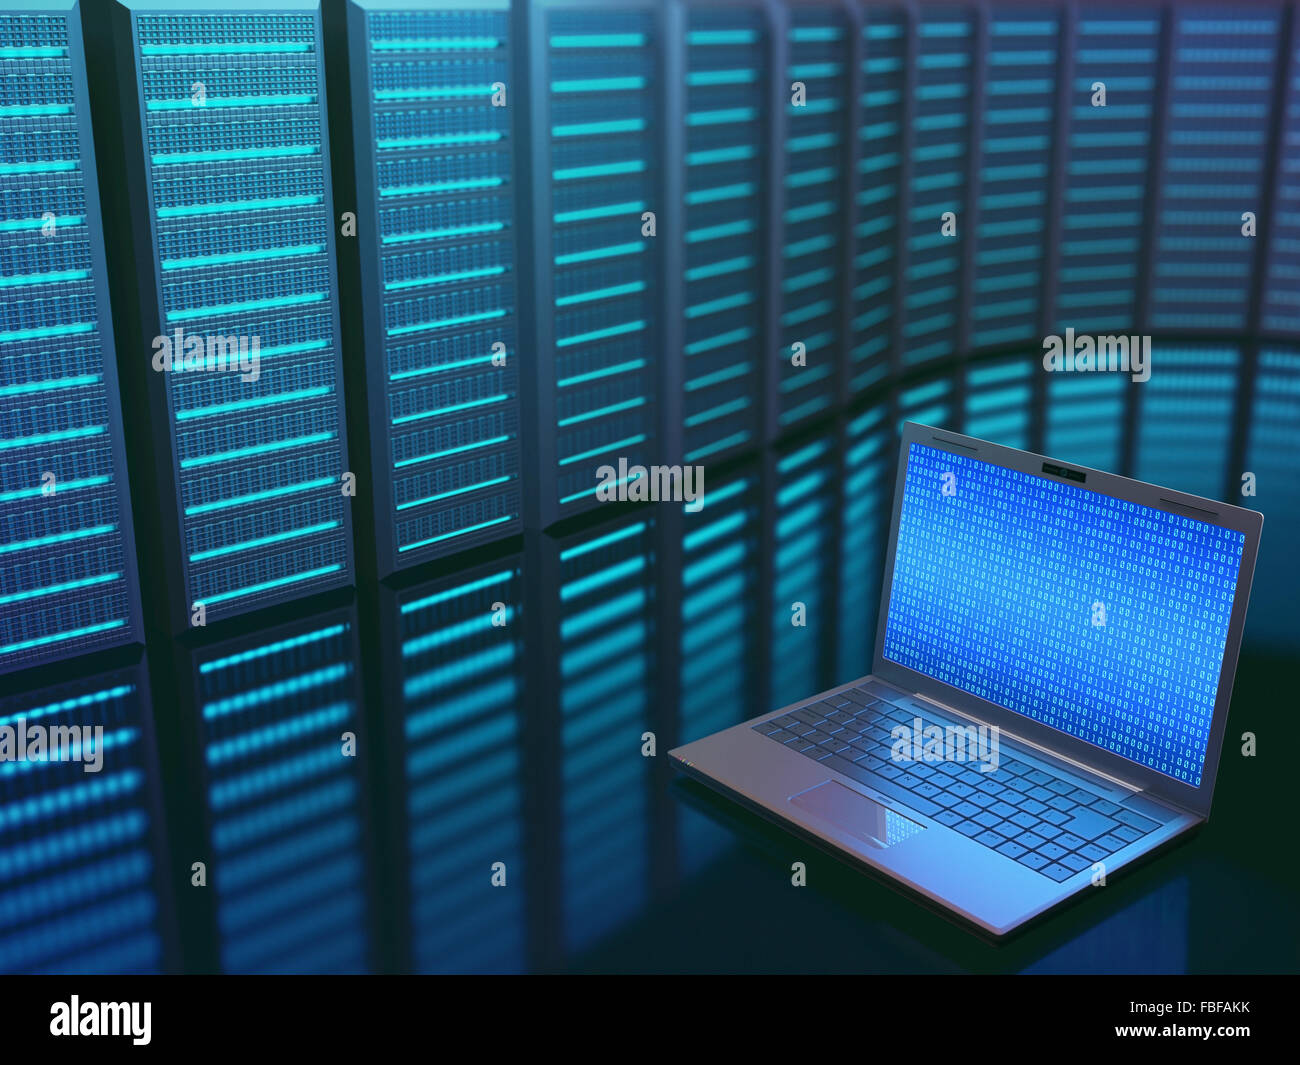 Image concept of technology and science of digital information. One laptop in front of multiple servers with binary numbers on s Stock Photo